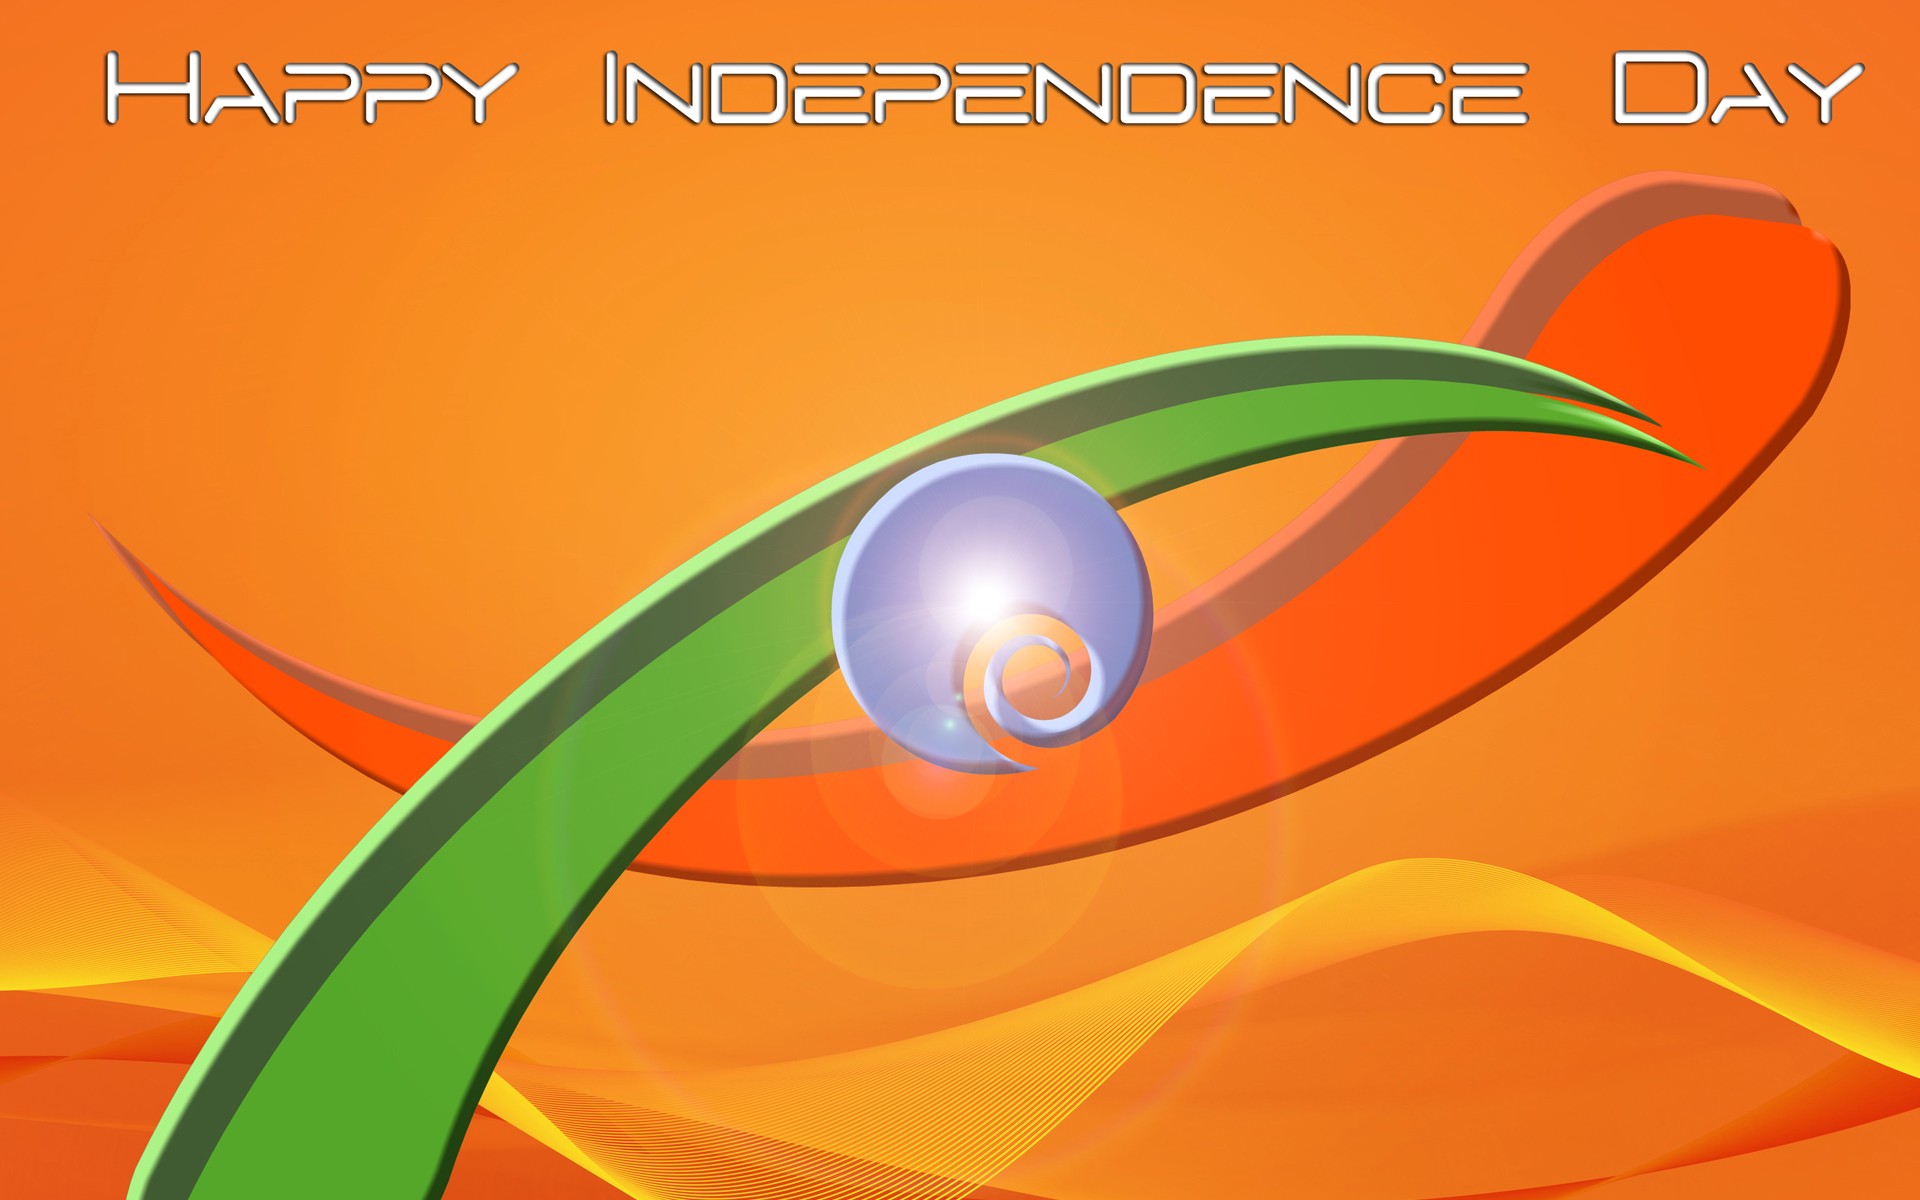 Independence Day India 2020 HD Images, Ultra-HD Wallpapers, 4K Pictures,  And Photographs For WhatsApp Status, Messenger, Facebook Status, And  Instagram Stories